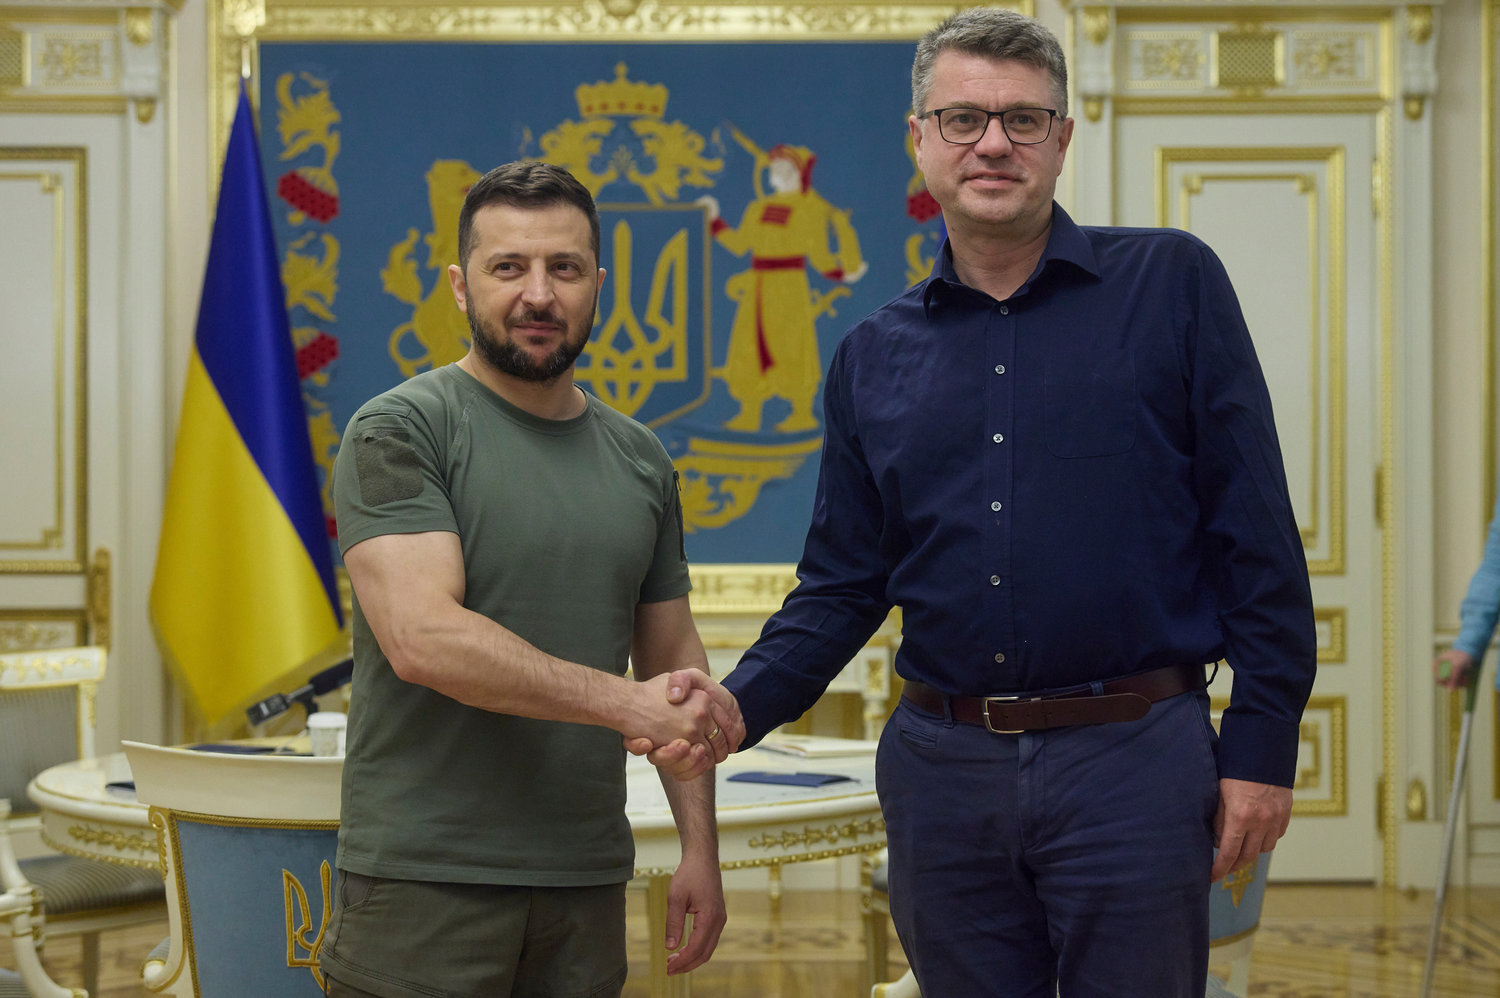 In this photo provided by the Ukrainian Presidential Press Office, Ukrainian President Volodymyr Zelenskyy, left, shakes hands with Minister of Foreign Affairs of the Republic of Estonia Urmas Reinsalu in Kyiv, Ukraine, Wednesday, Aug. 3, 2022. (Ukrainian Presidential Press Office via AP)